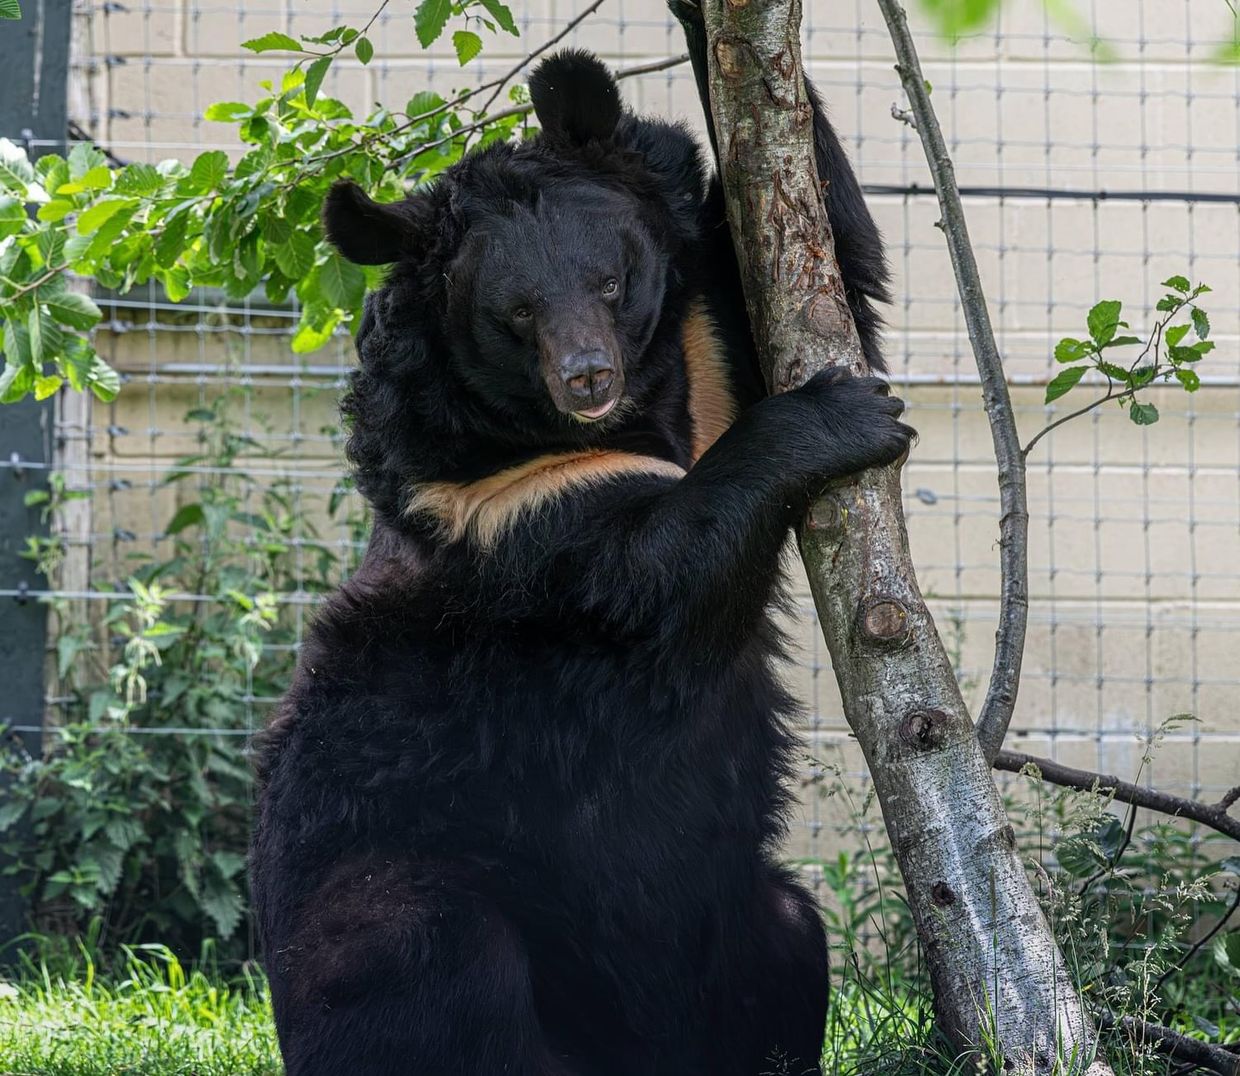 Donetsk bear adopted by Scottish zoo dies after medical procedure